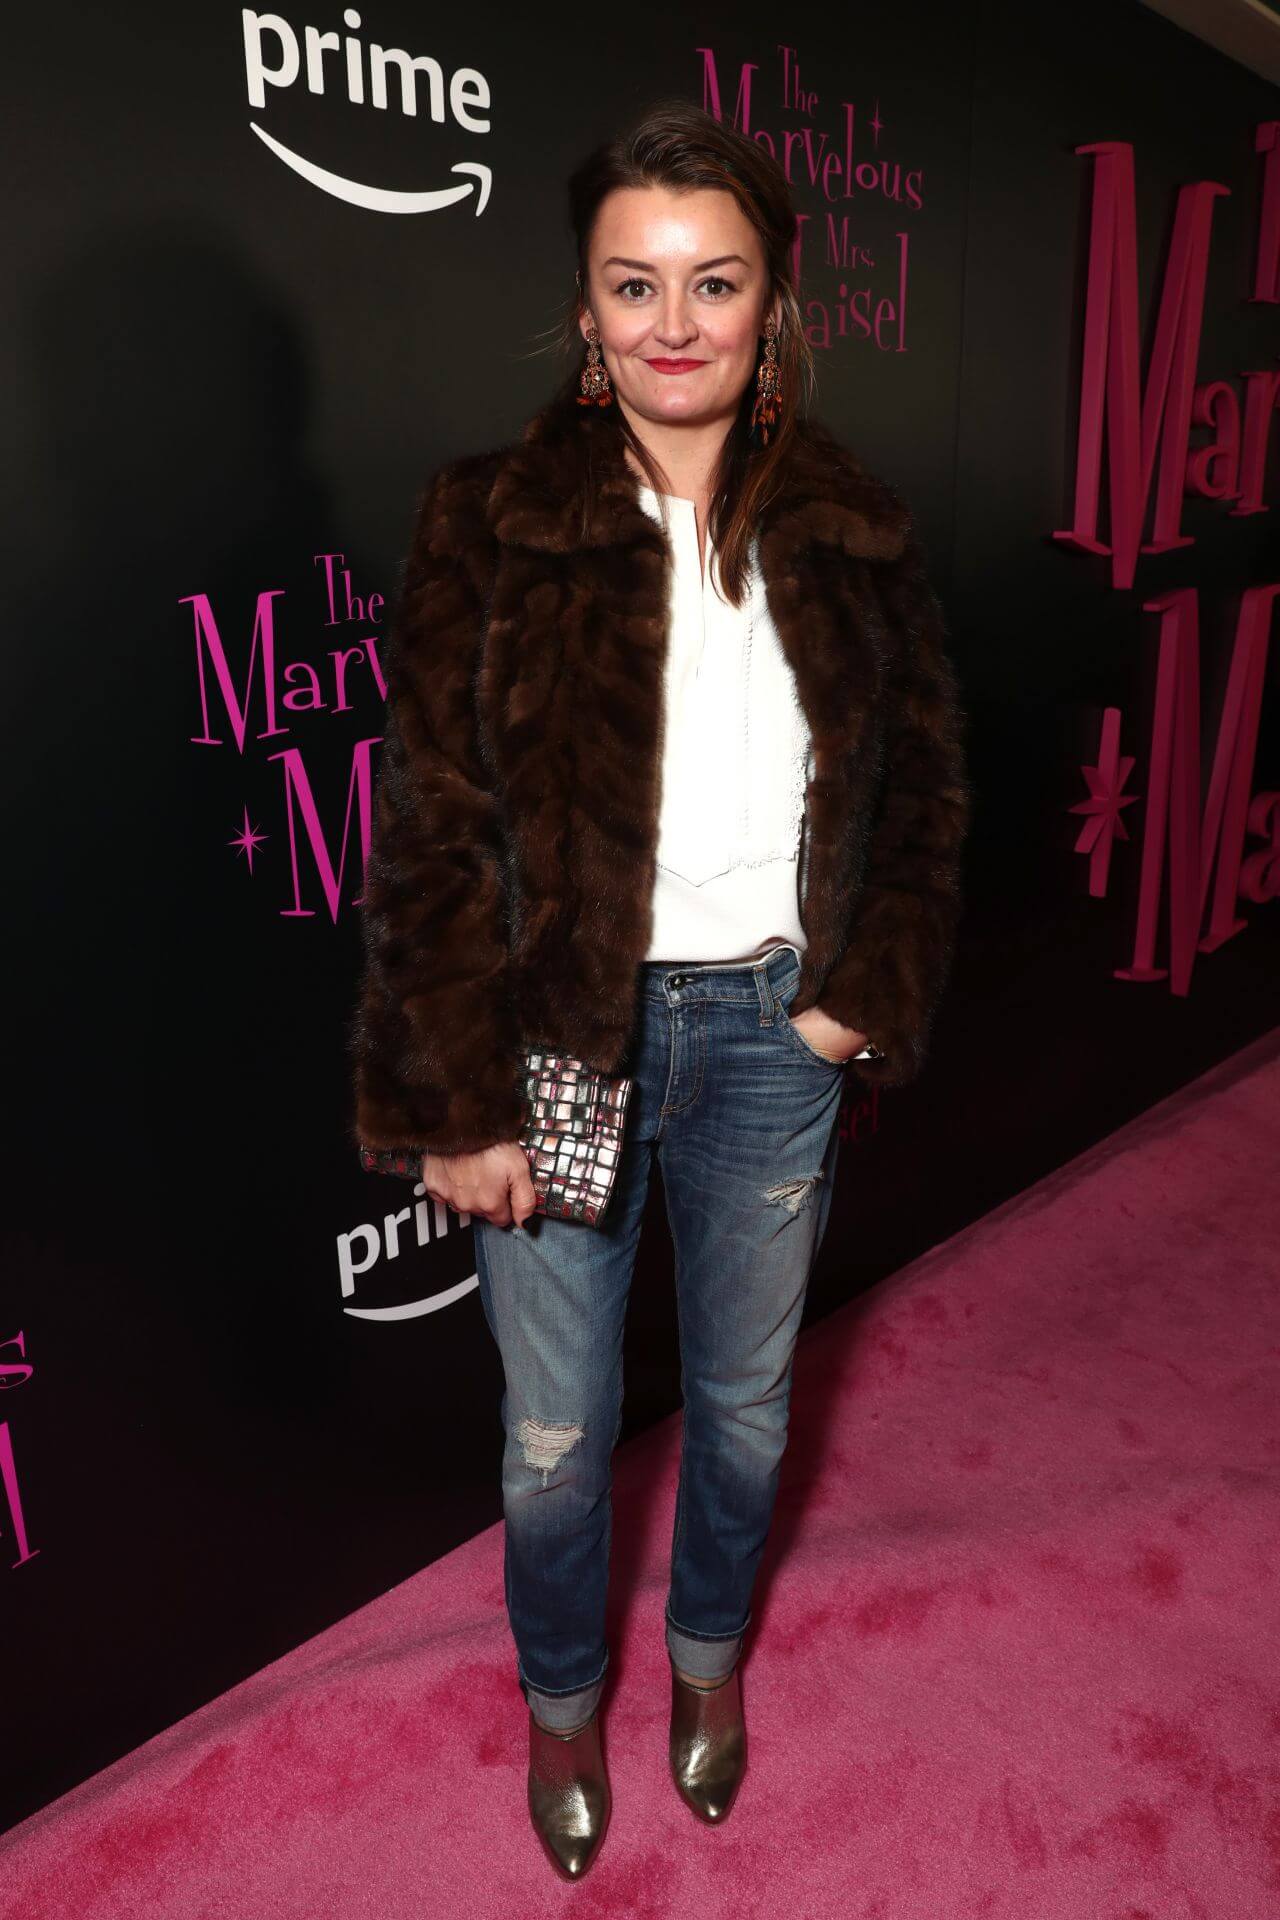 Alison Wright – Elegant In Brown  Fur Coat & White Top With Denim Jeans -  “The Marvelous Mrs. Maisel” TV Series Premiere in New York